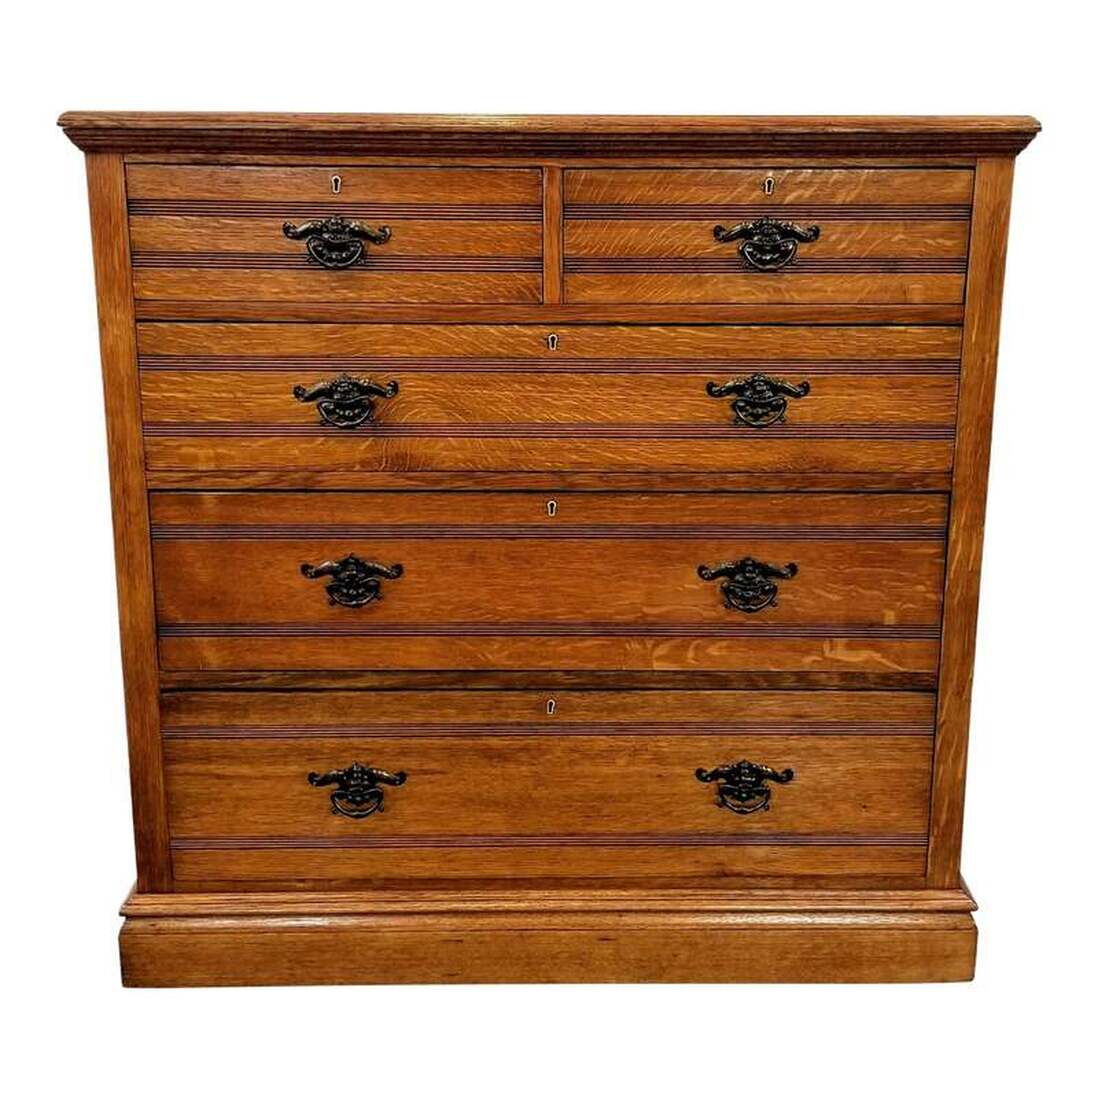 Original Medieval-influenced English Arts & Crafts oak chest of five drawers based on an 1874-1876 creation by Owen William Davis for James Shoolbred & Co. Chest has two small side-by-side drawers at top followed by three full-length drawers below. The drawers are accessed by tugging on the copper-plated Arts & Crafts pulls.  Dresser is constructed with quarter sawn (